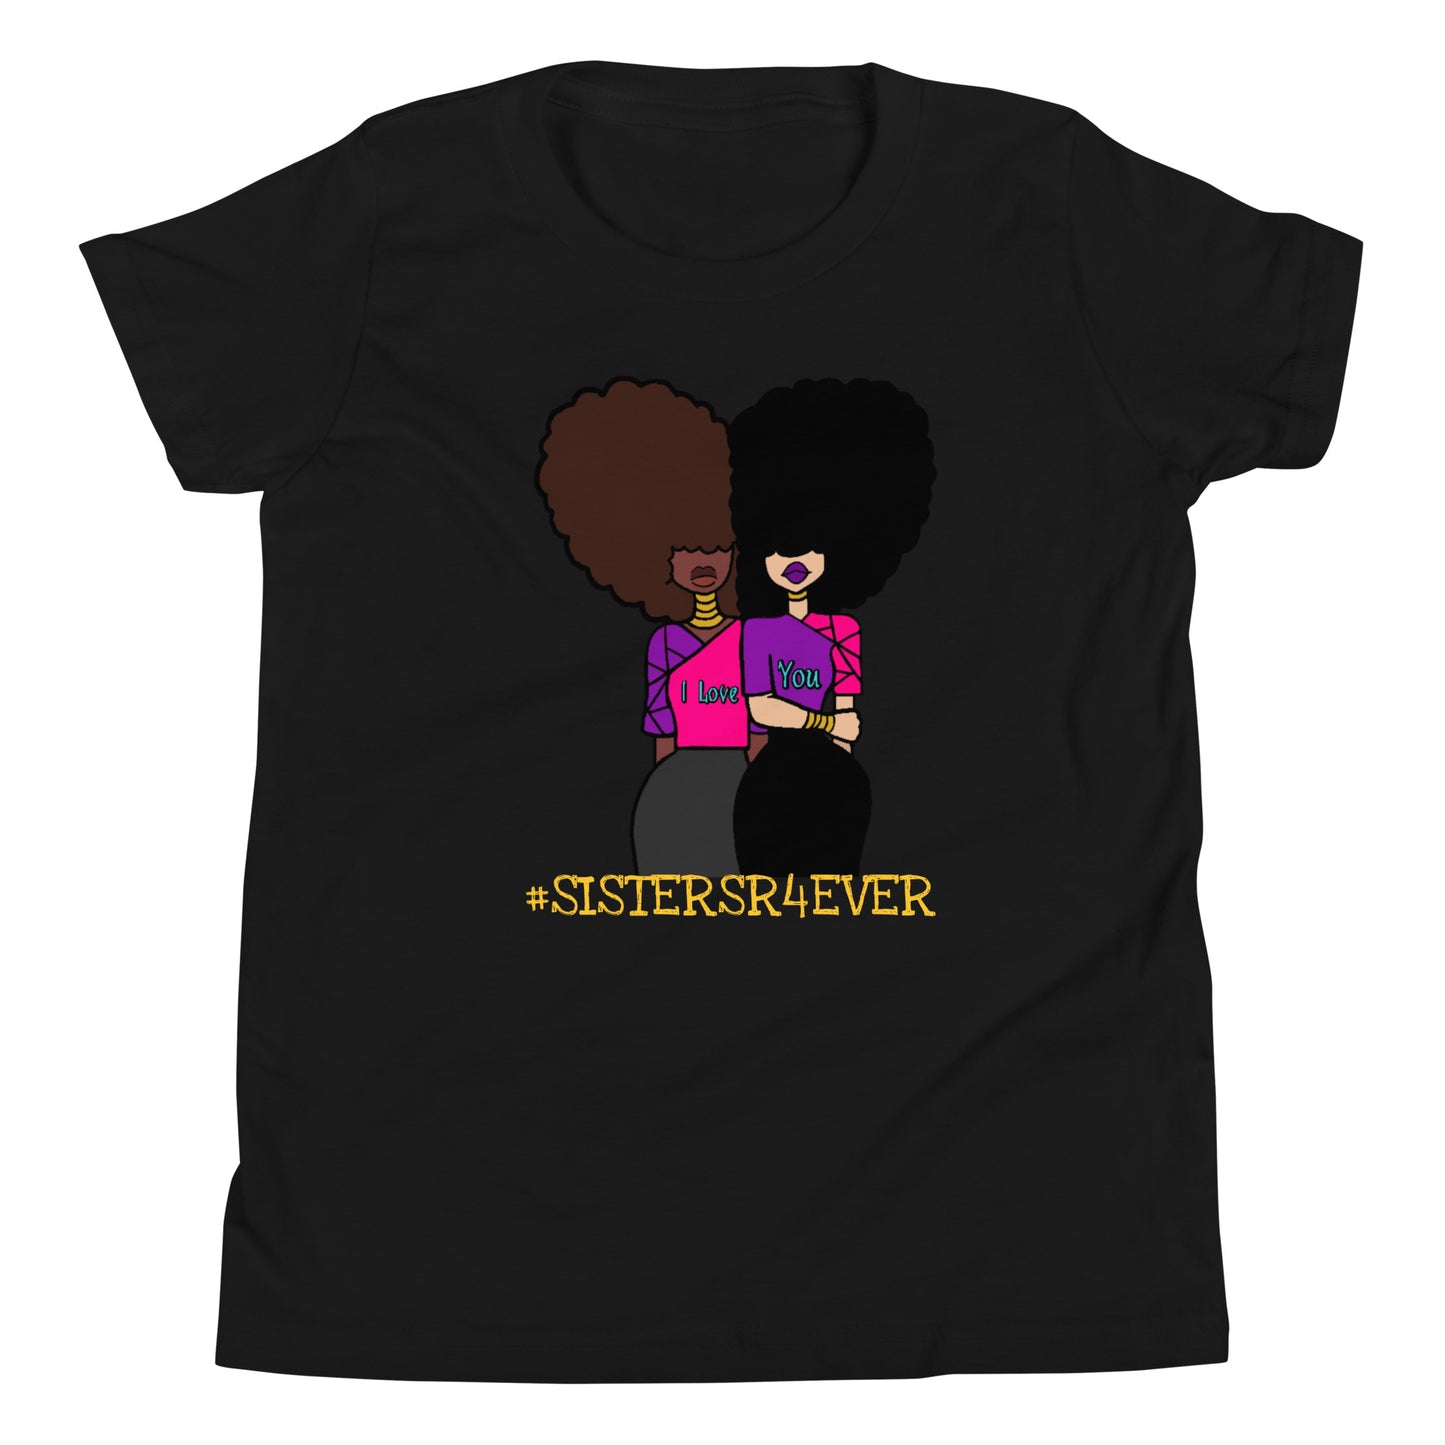 #SISTERSR4EVER Girl's Youth Short Sleeve T-Shirt